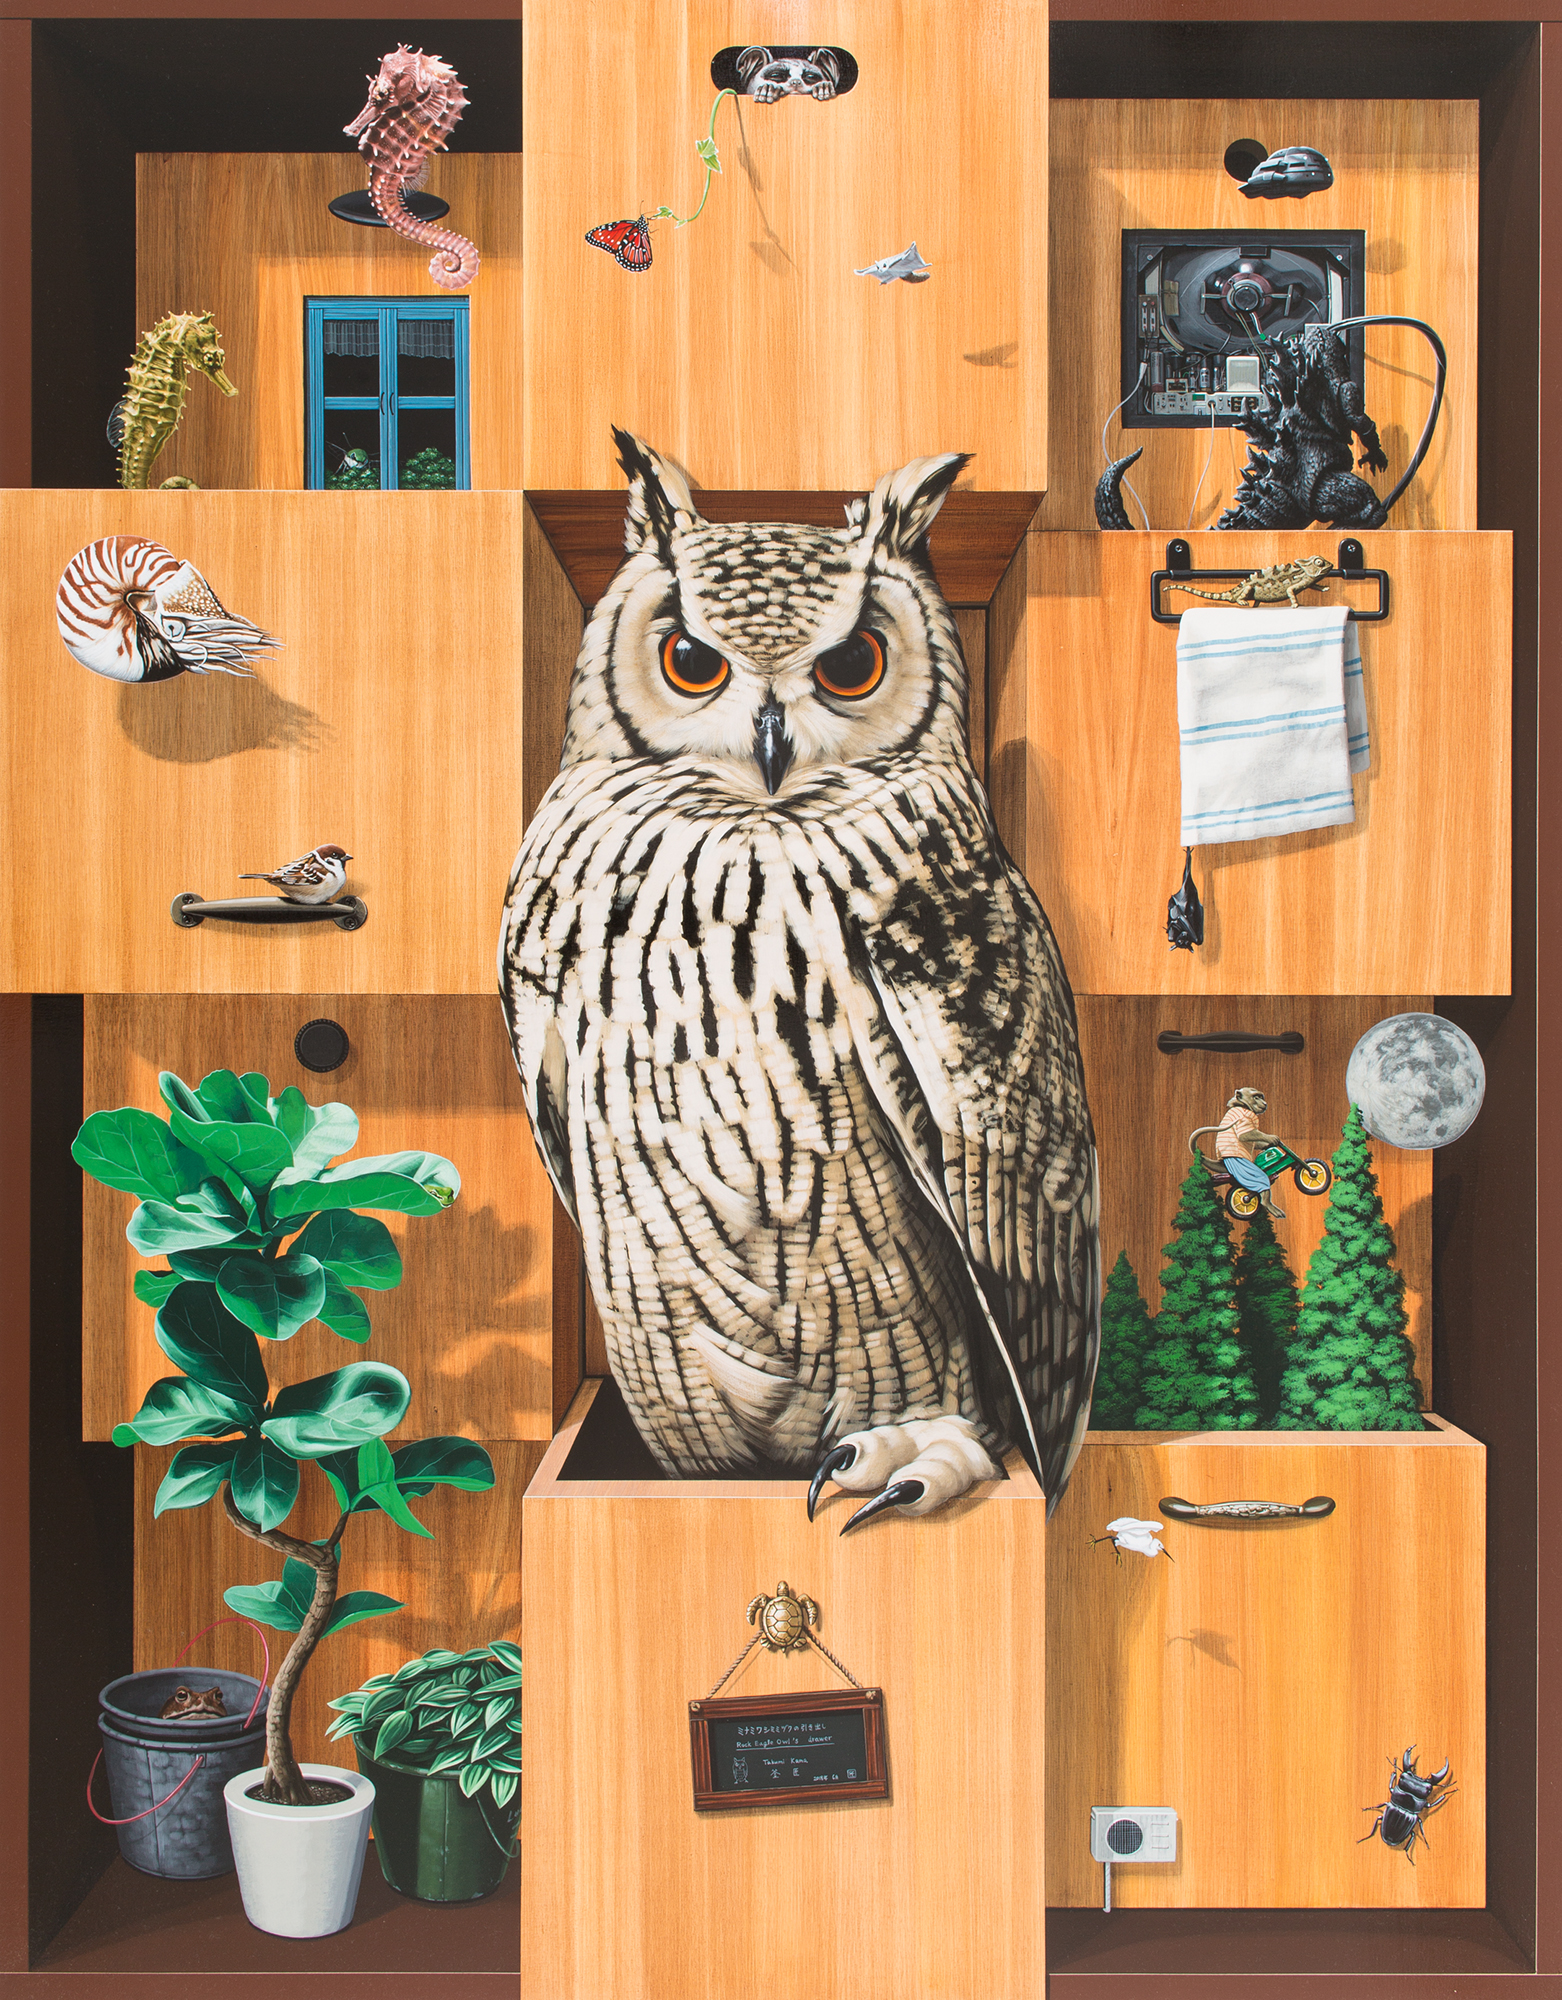 A painting of an owl perched in the center of a grid of wooden file drawers decorated with plants and small objects